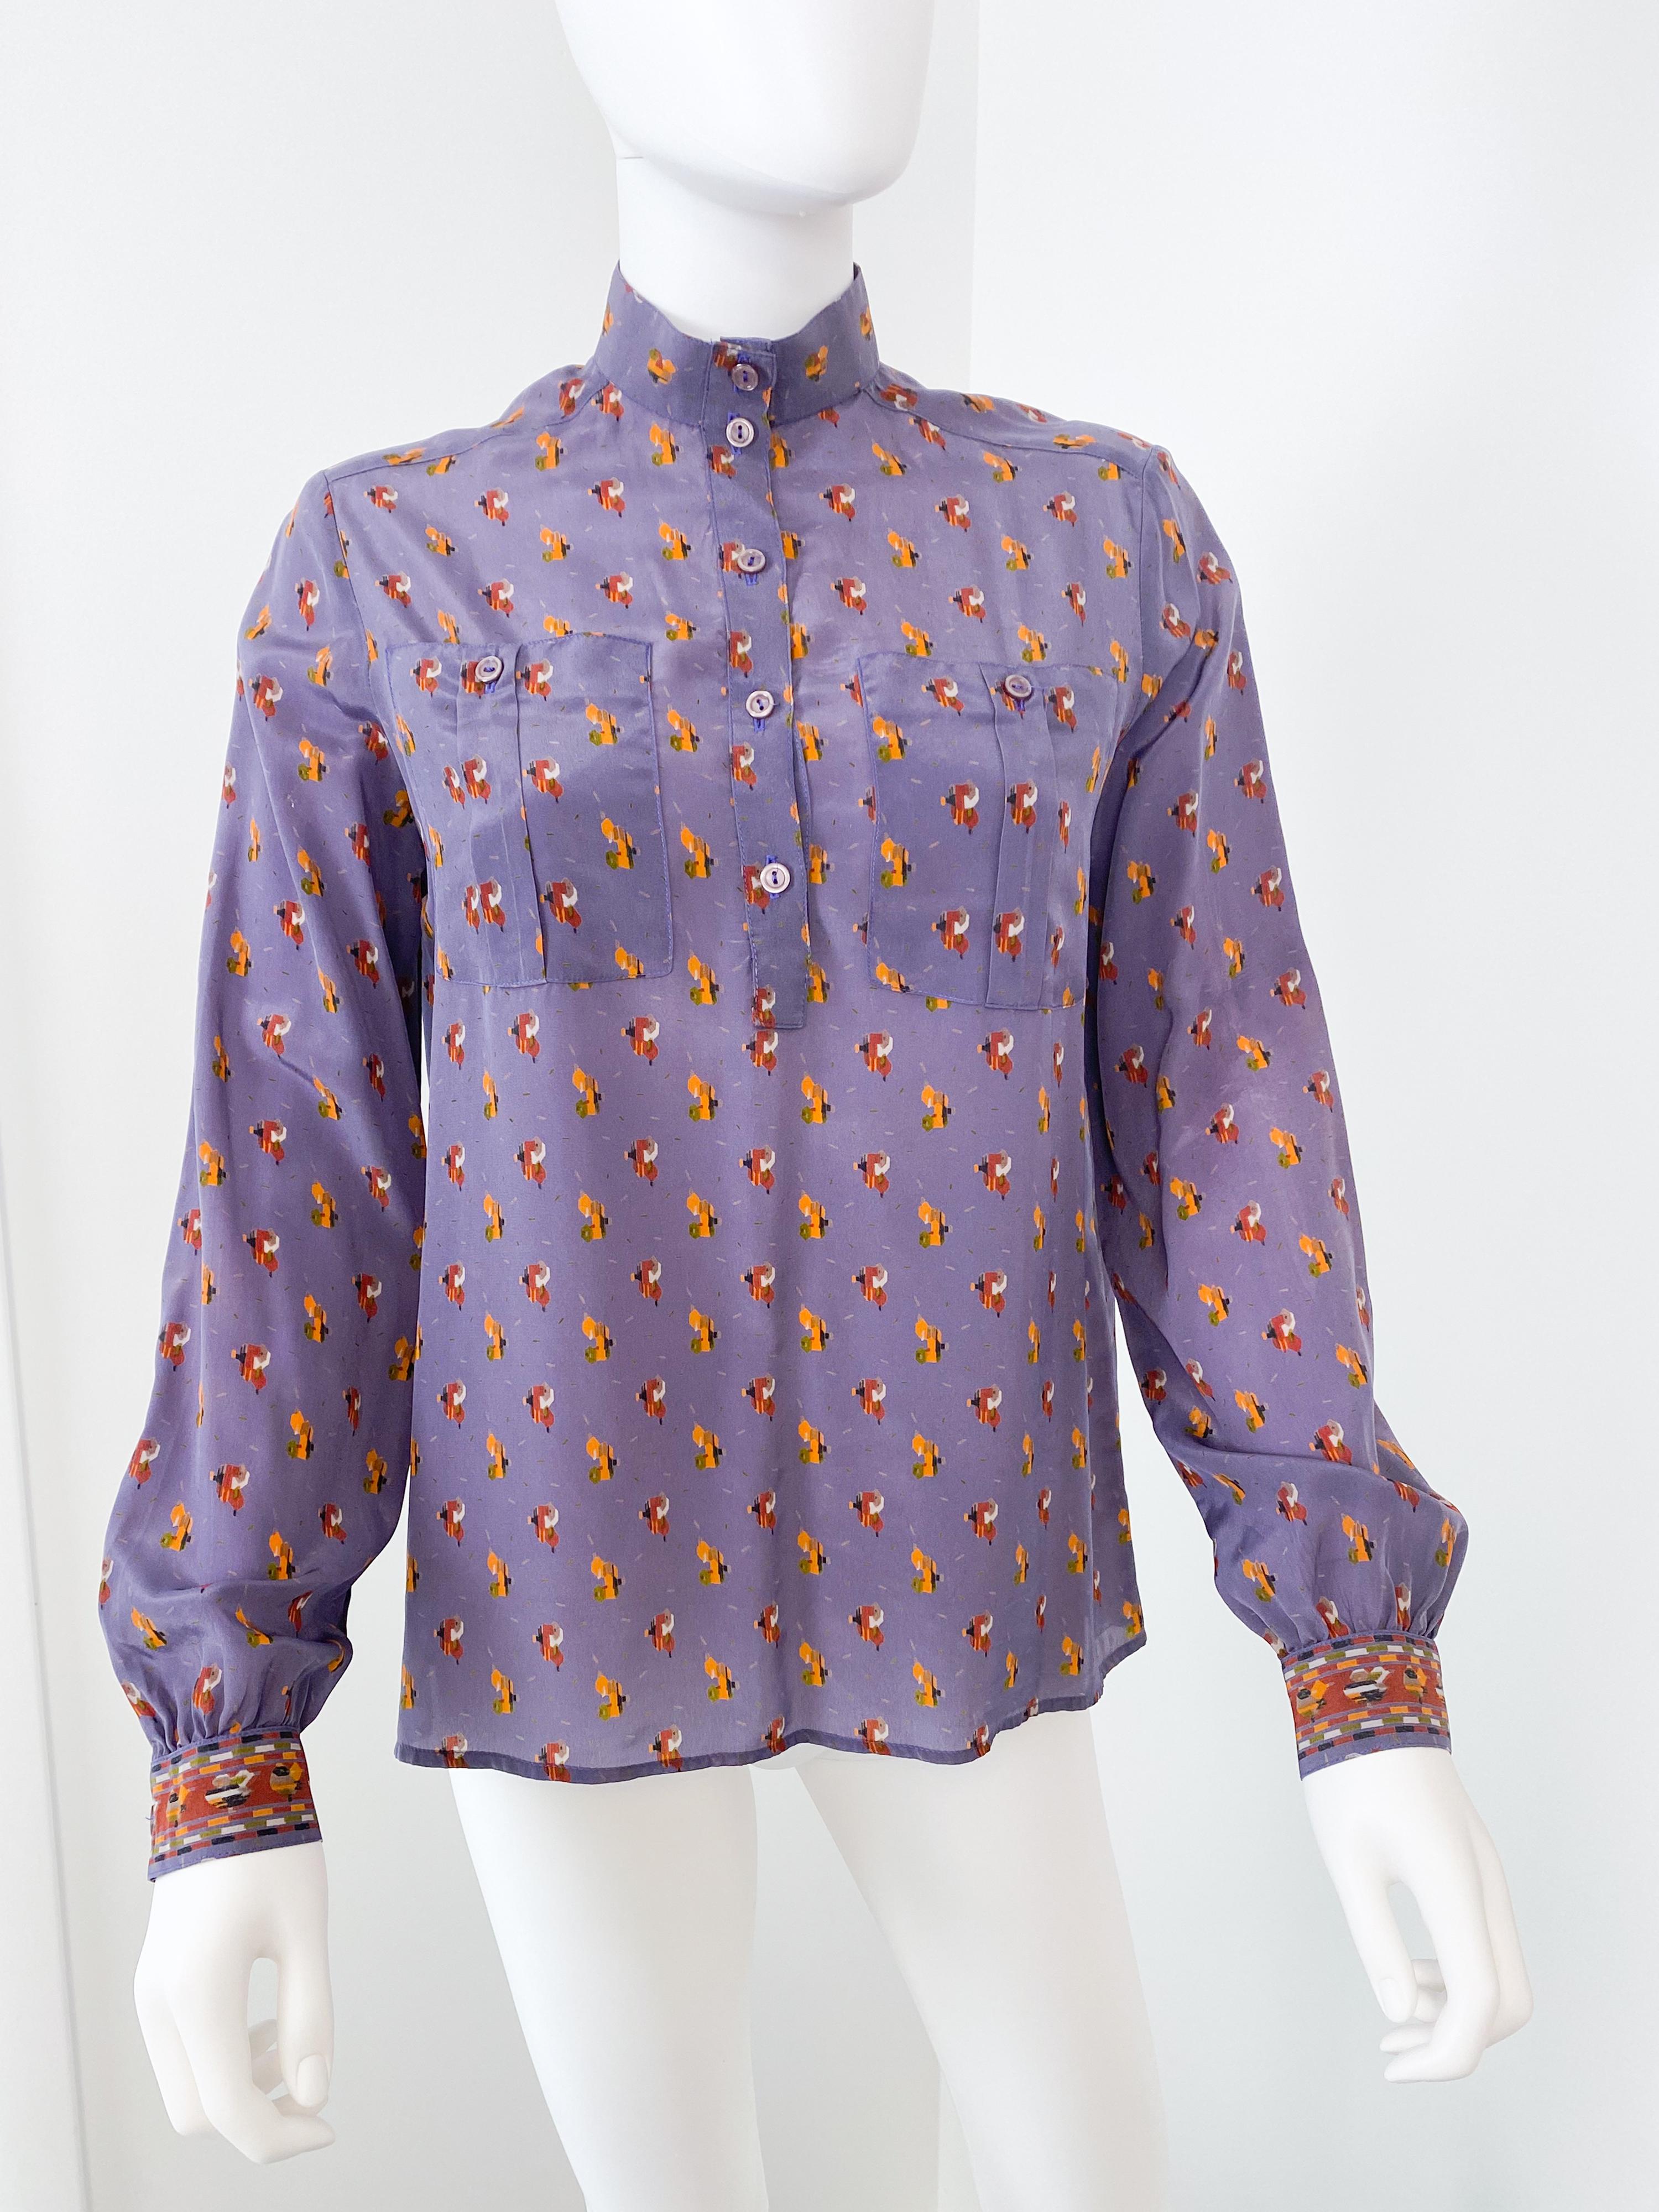 Women's Vintage 1980s Silky Polyester Blouse Top Purple with Print Decor Size 6 For Sale